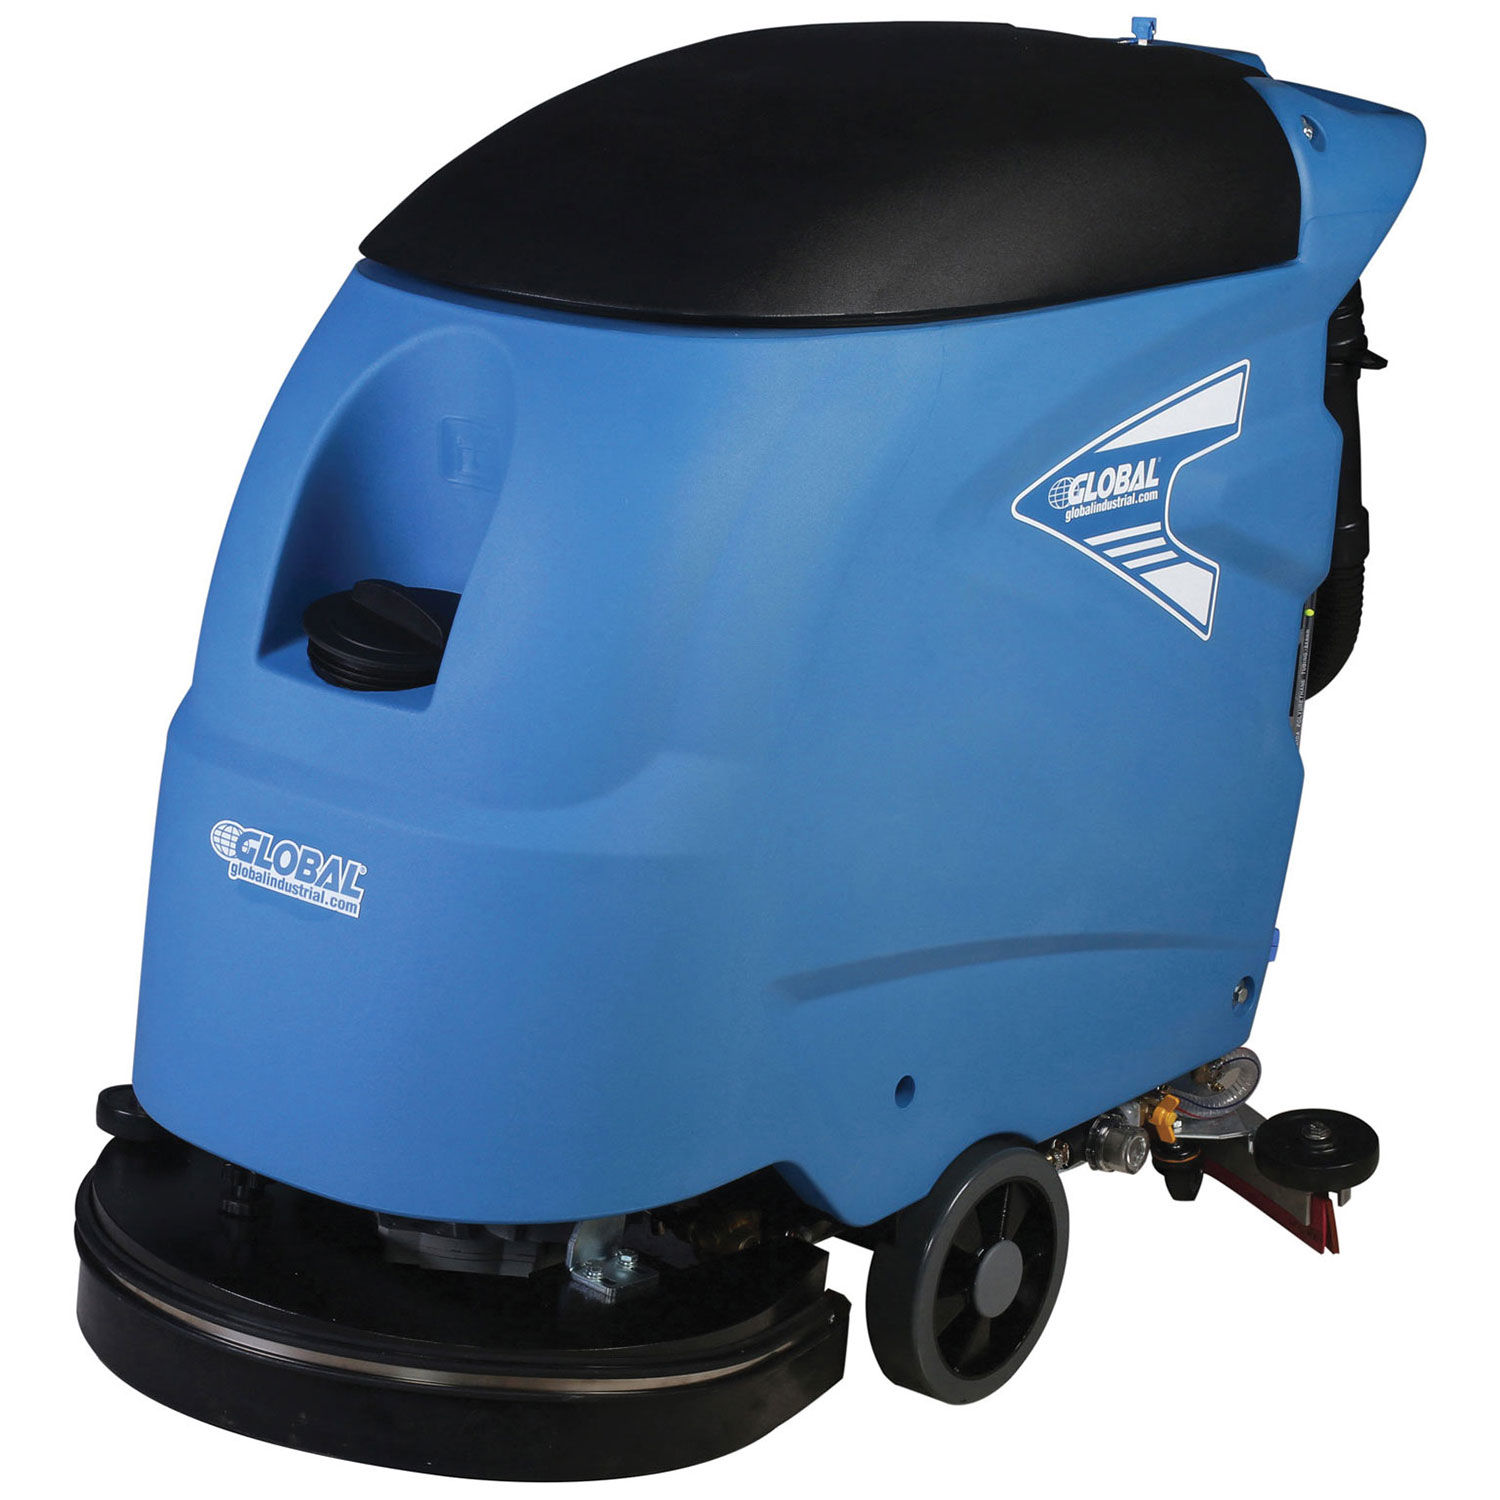 Corded Electric Auto Floor Scrubber with 18" Cleaning Path 707022345606 eBay